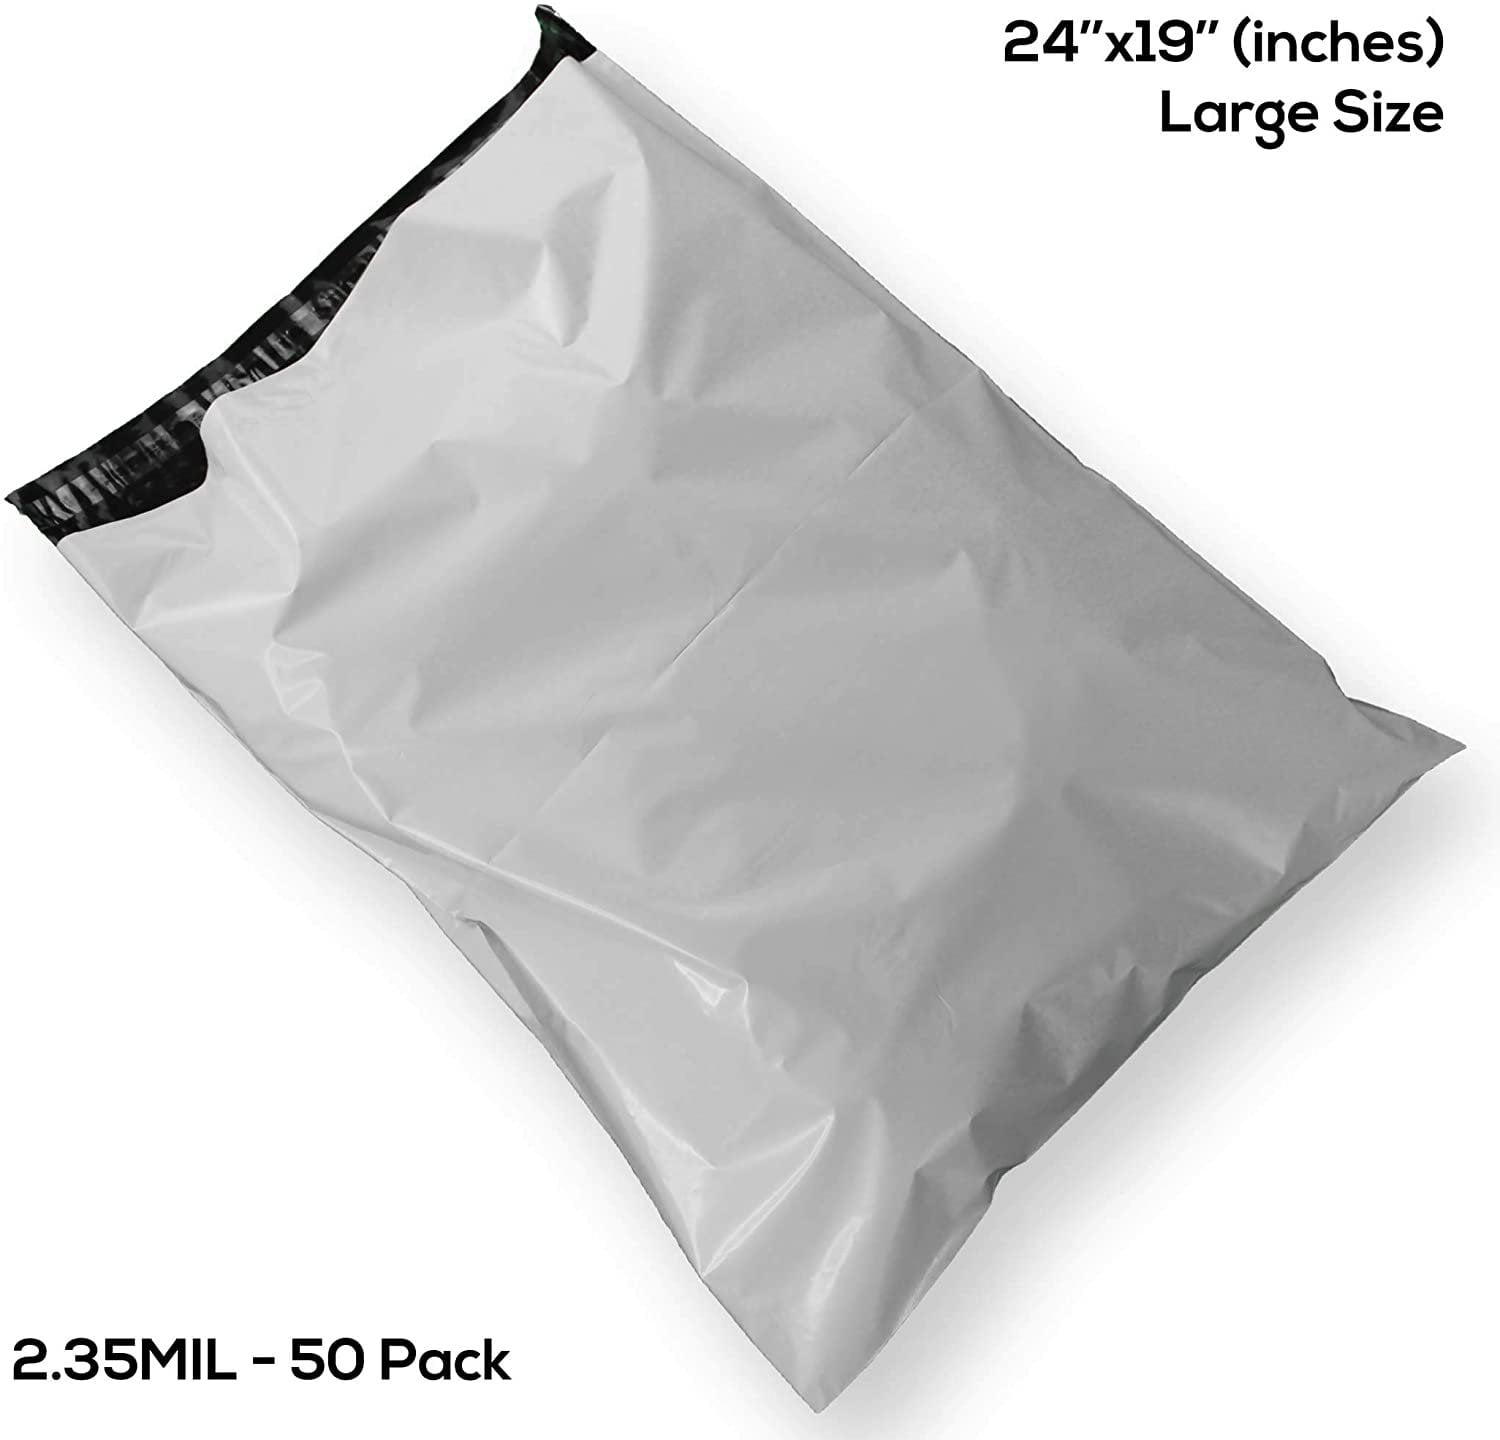 20 Grey Mailing Mailer Packaging Plastic Bags Large Size 17' x 24' QUICK POSTAGE 